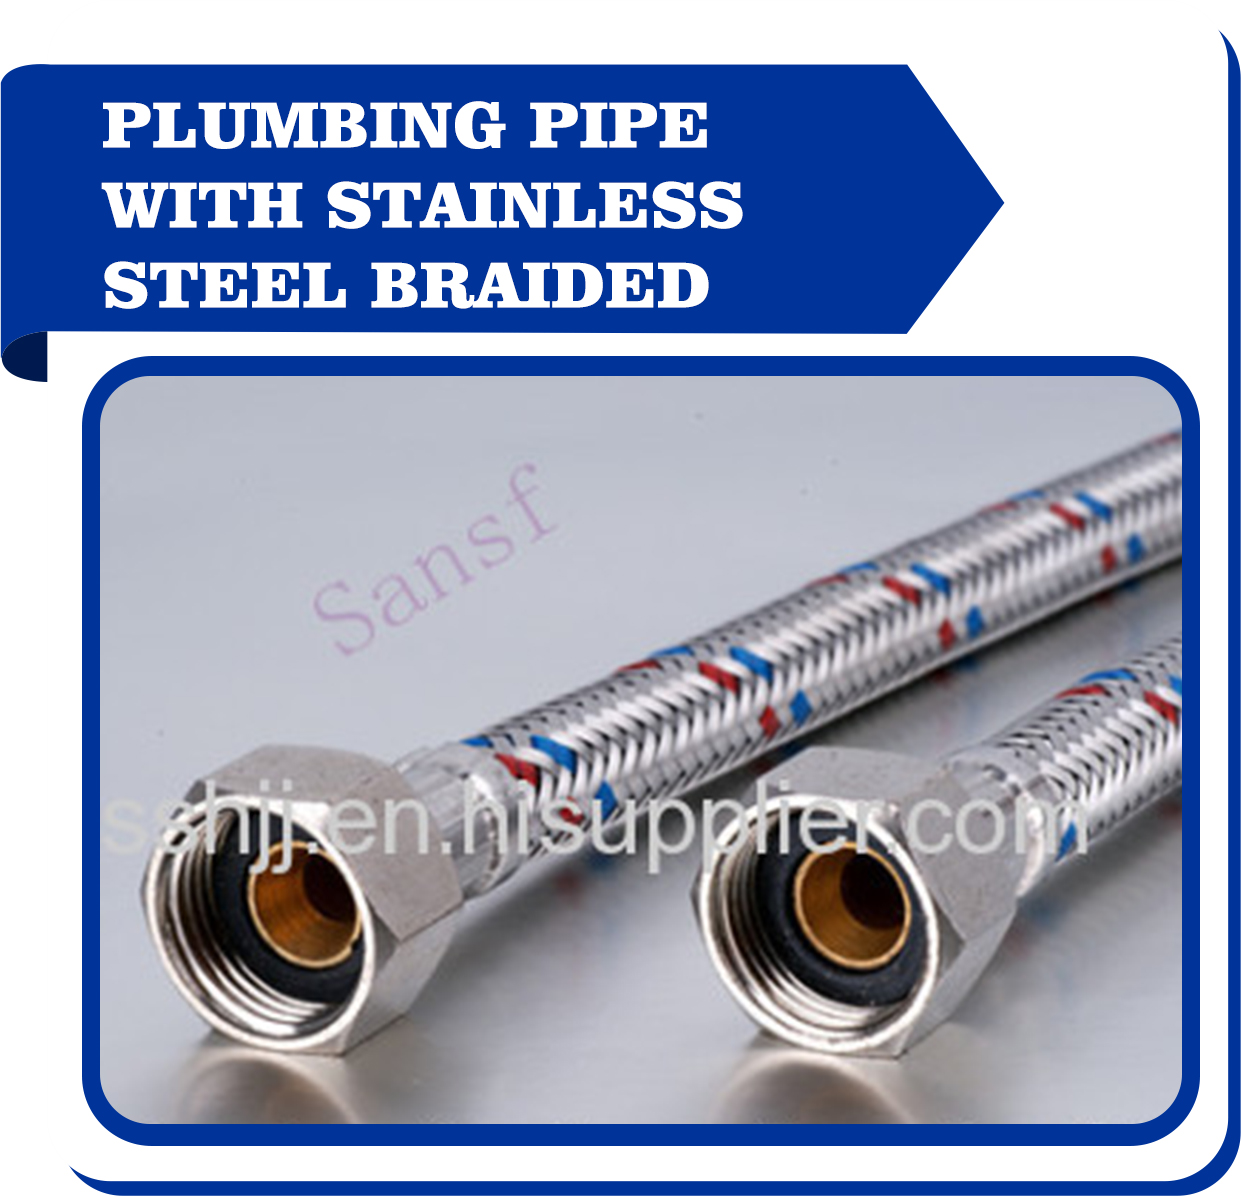 Plumbing hose with stainless steel braided